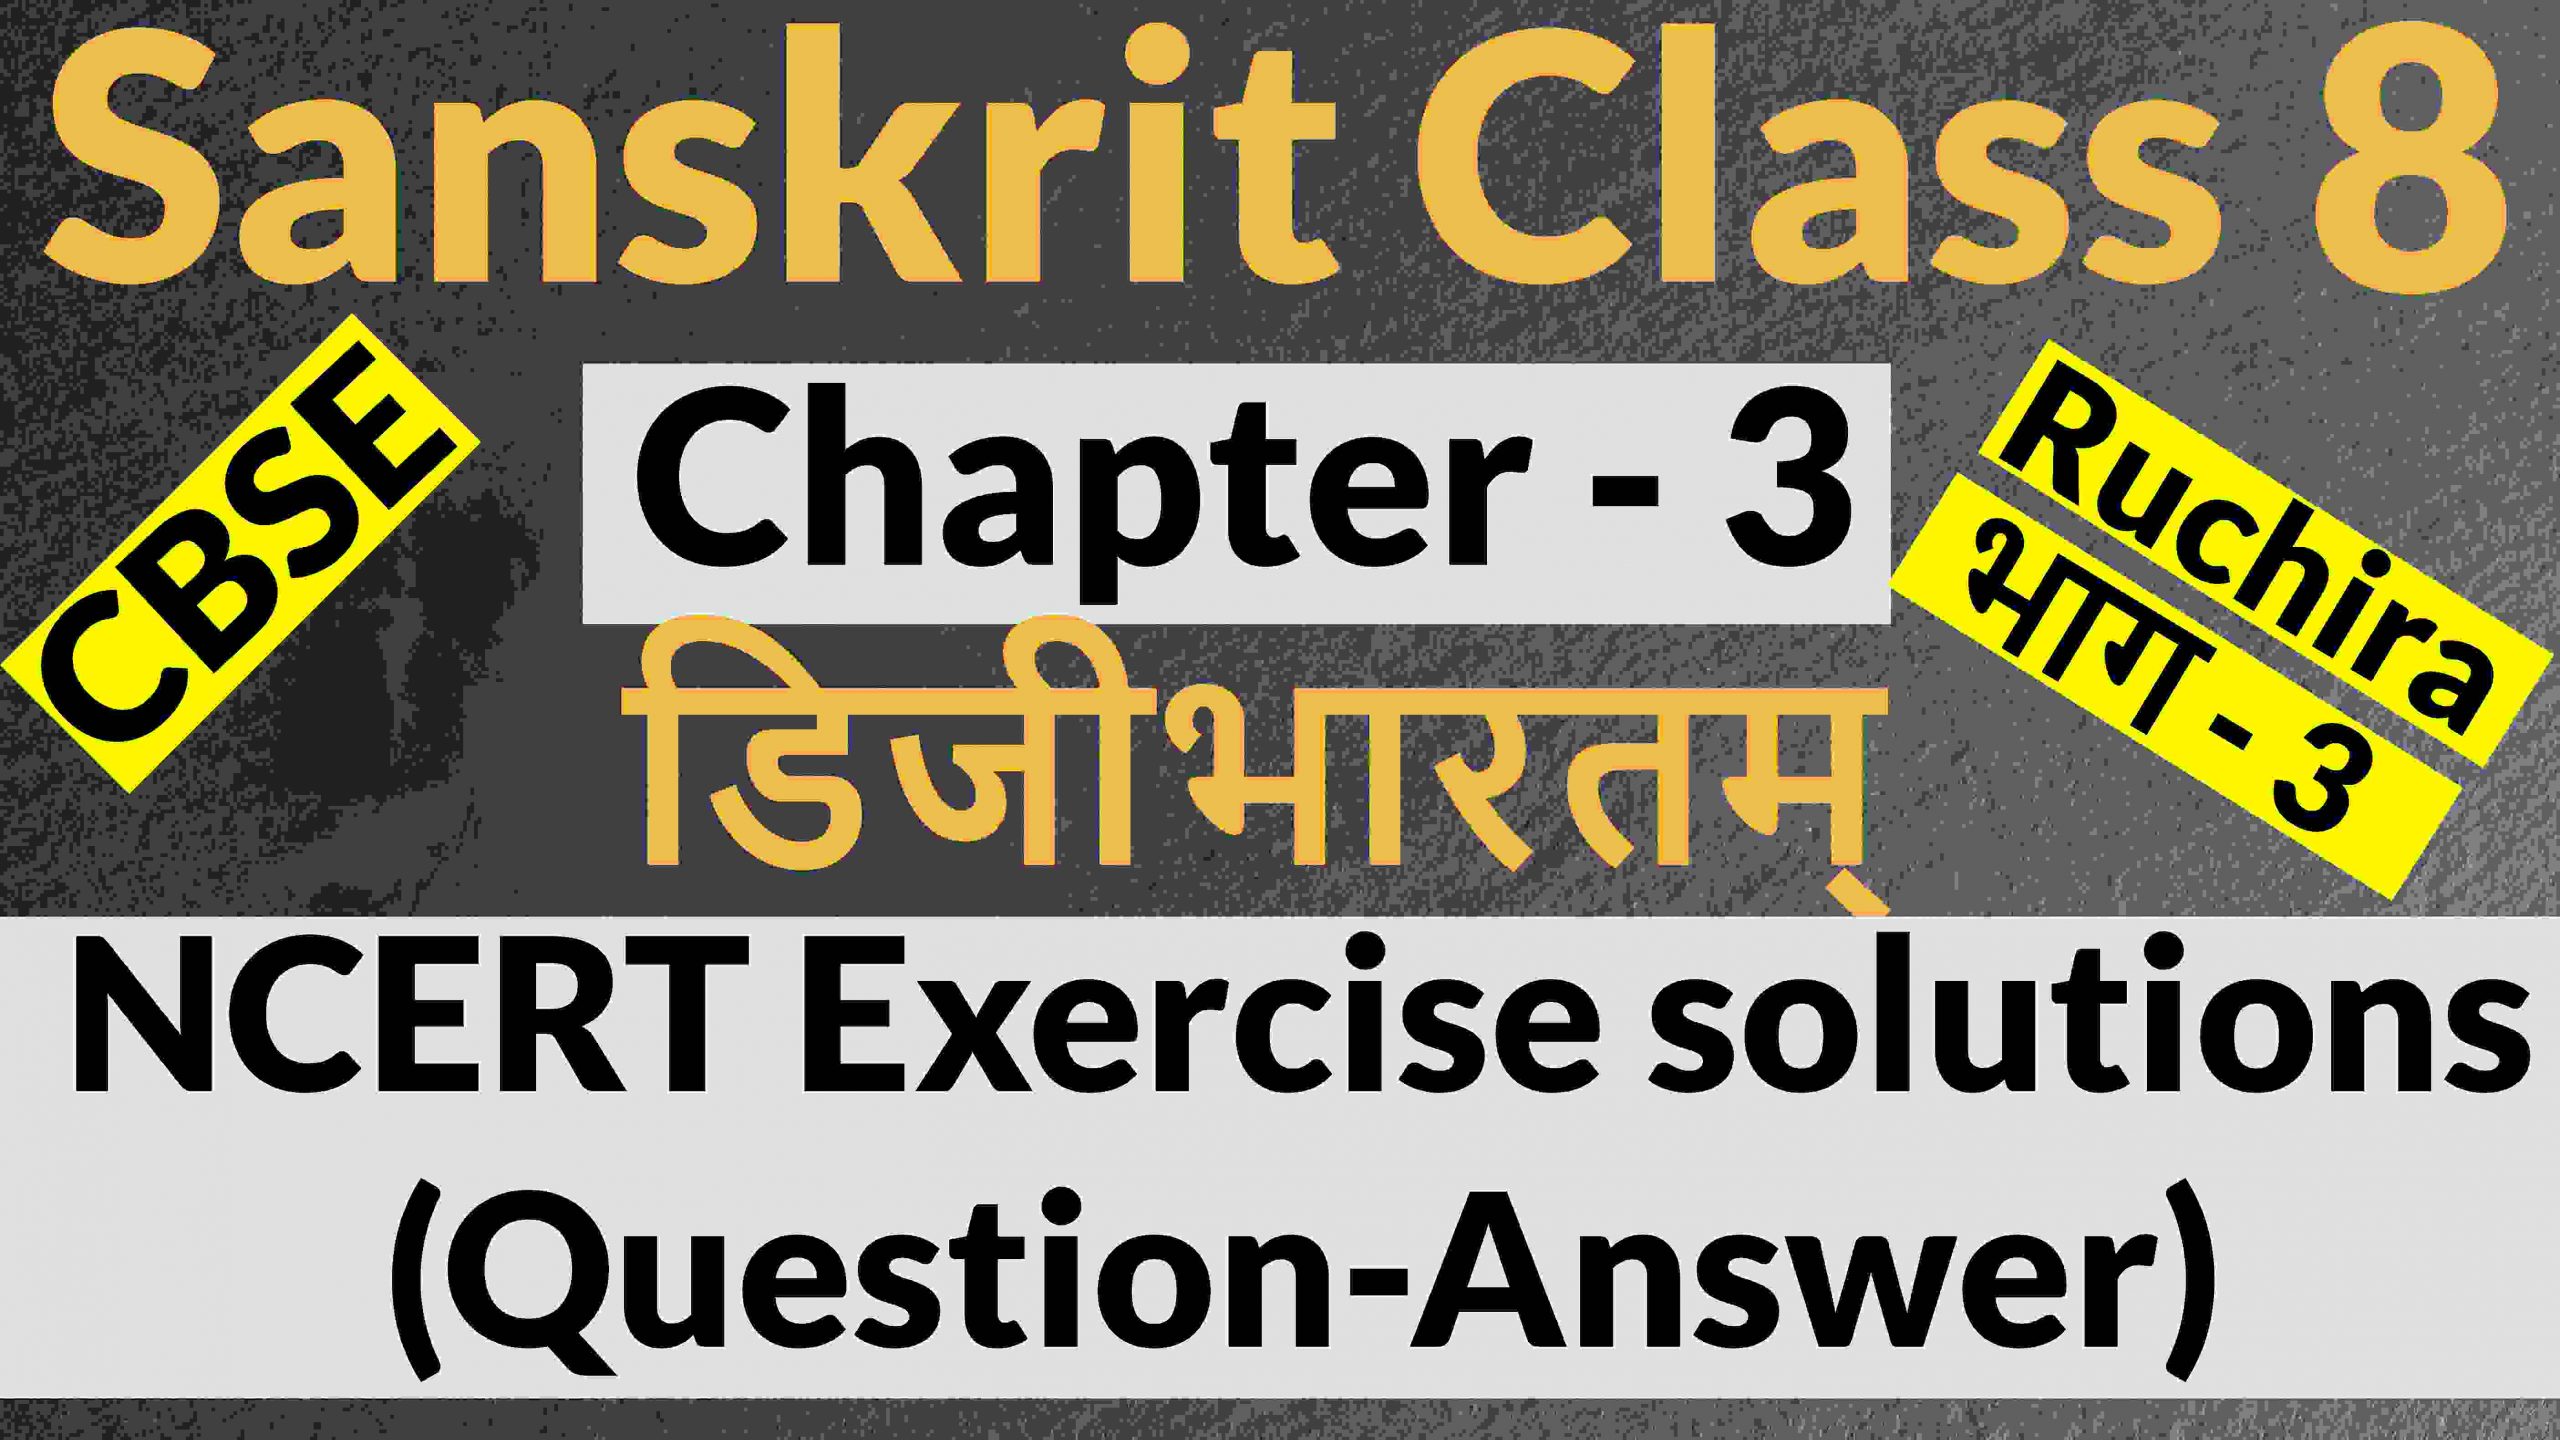 Sanskrit Class 8 Chapter 3- डिजीभारतम्- NCERT Exercise Solution (Question-Answer)